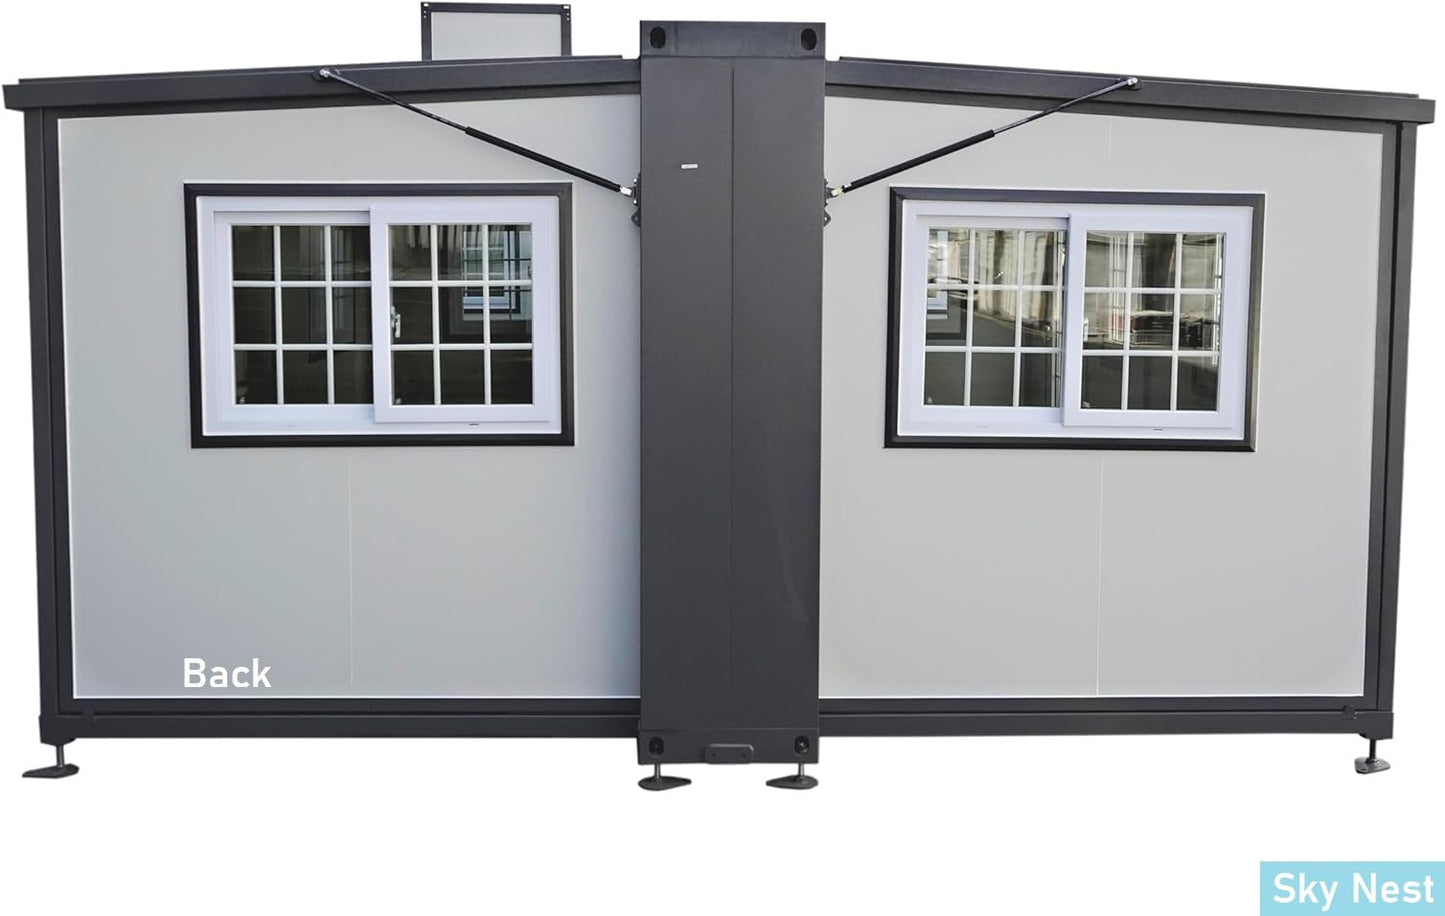 Sky Nest Portable Prefabricated Tiny Home 16.5x20ft, Mobile Expandable Plastic Prefab House for Hotel, Booth, Office, Guard House, Shop, Warehouse, Workshop (No Restroom)